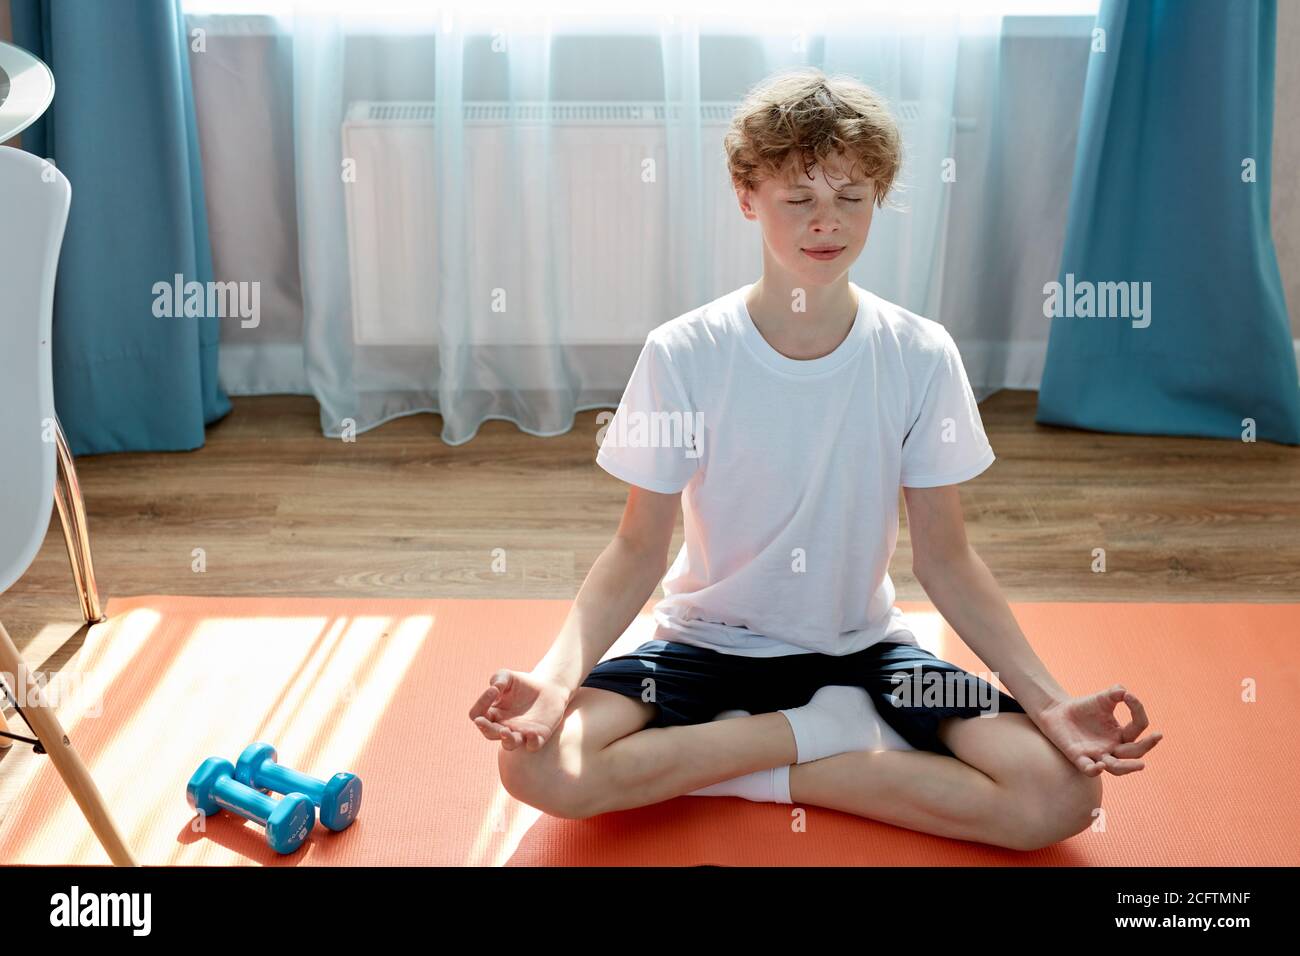 young caucasian teen boy exercising sport at home, practice yoga, sit in pose, keep calm, meditating Stock Photo